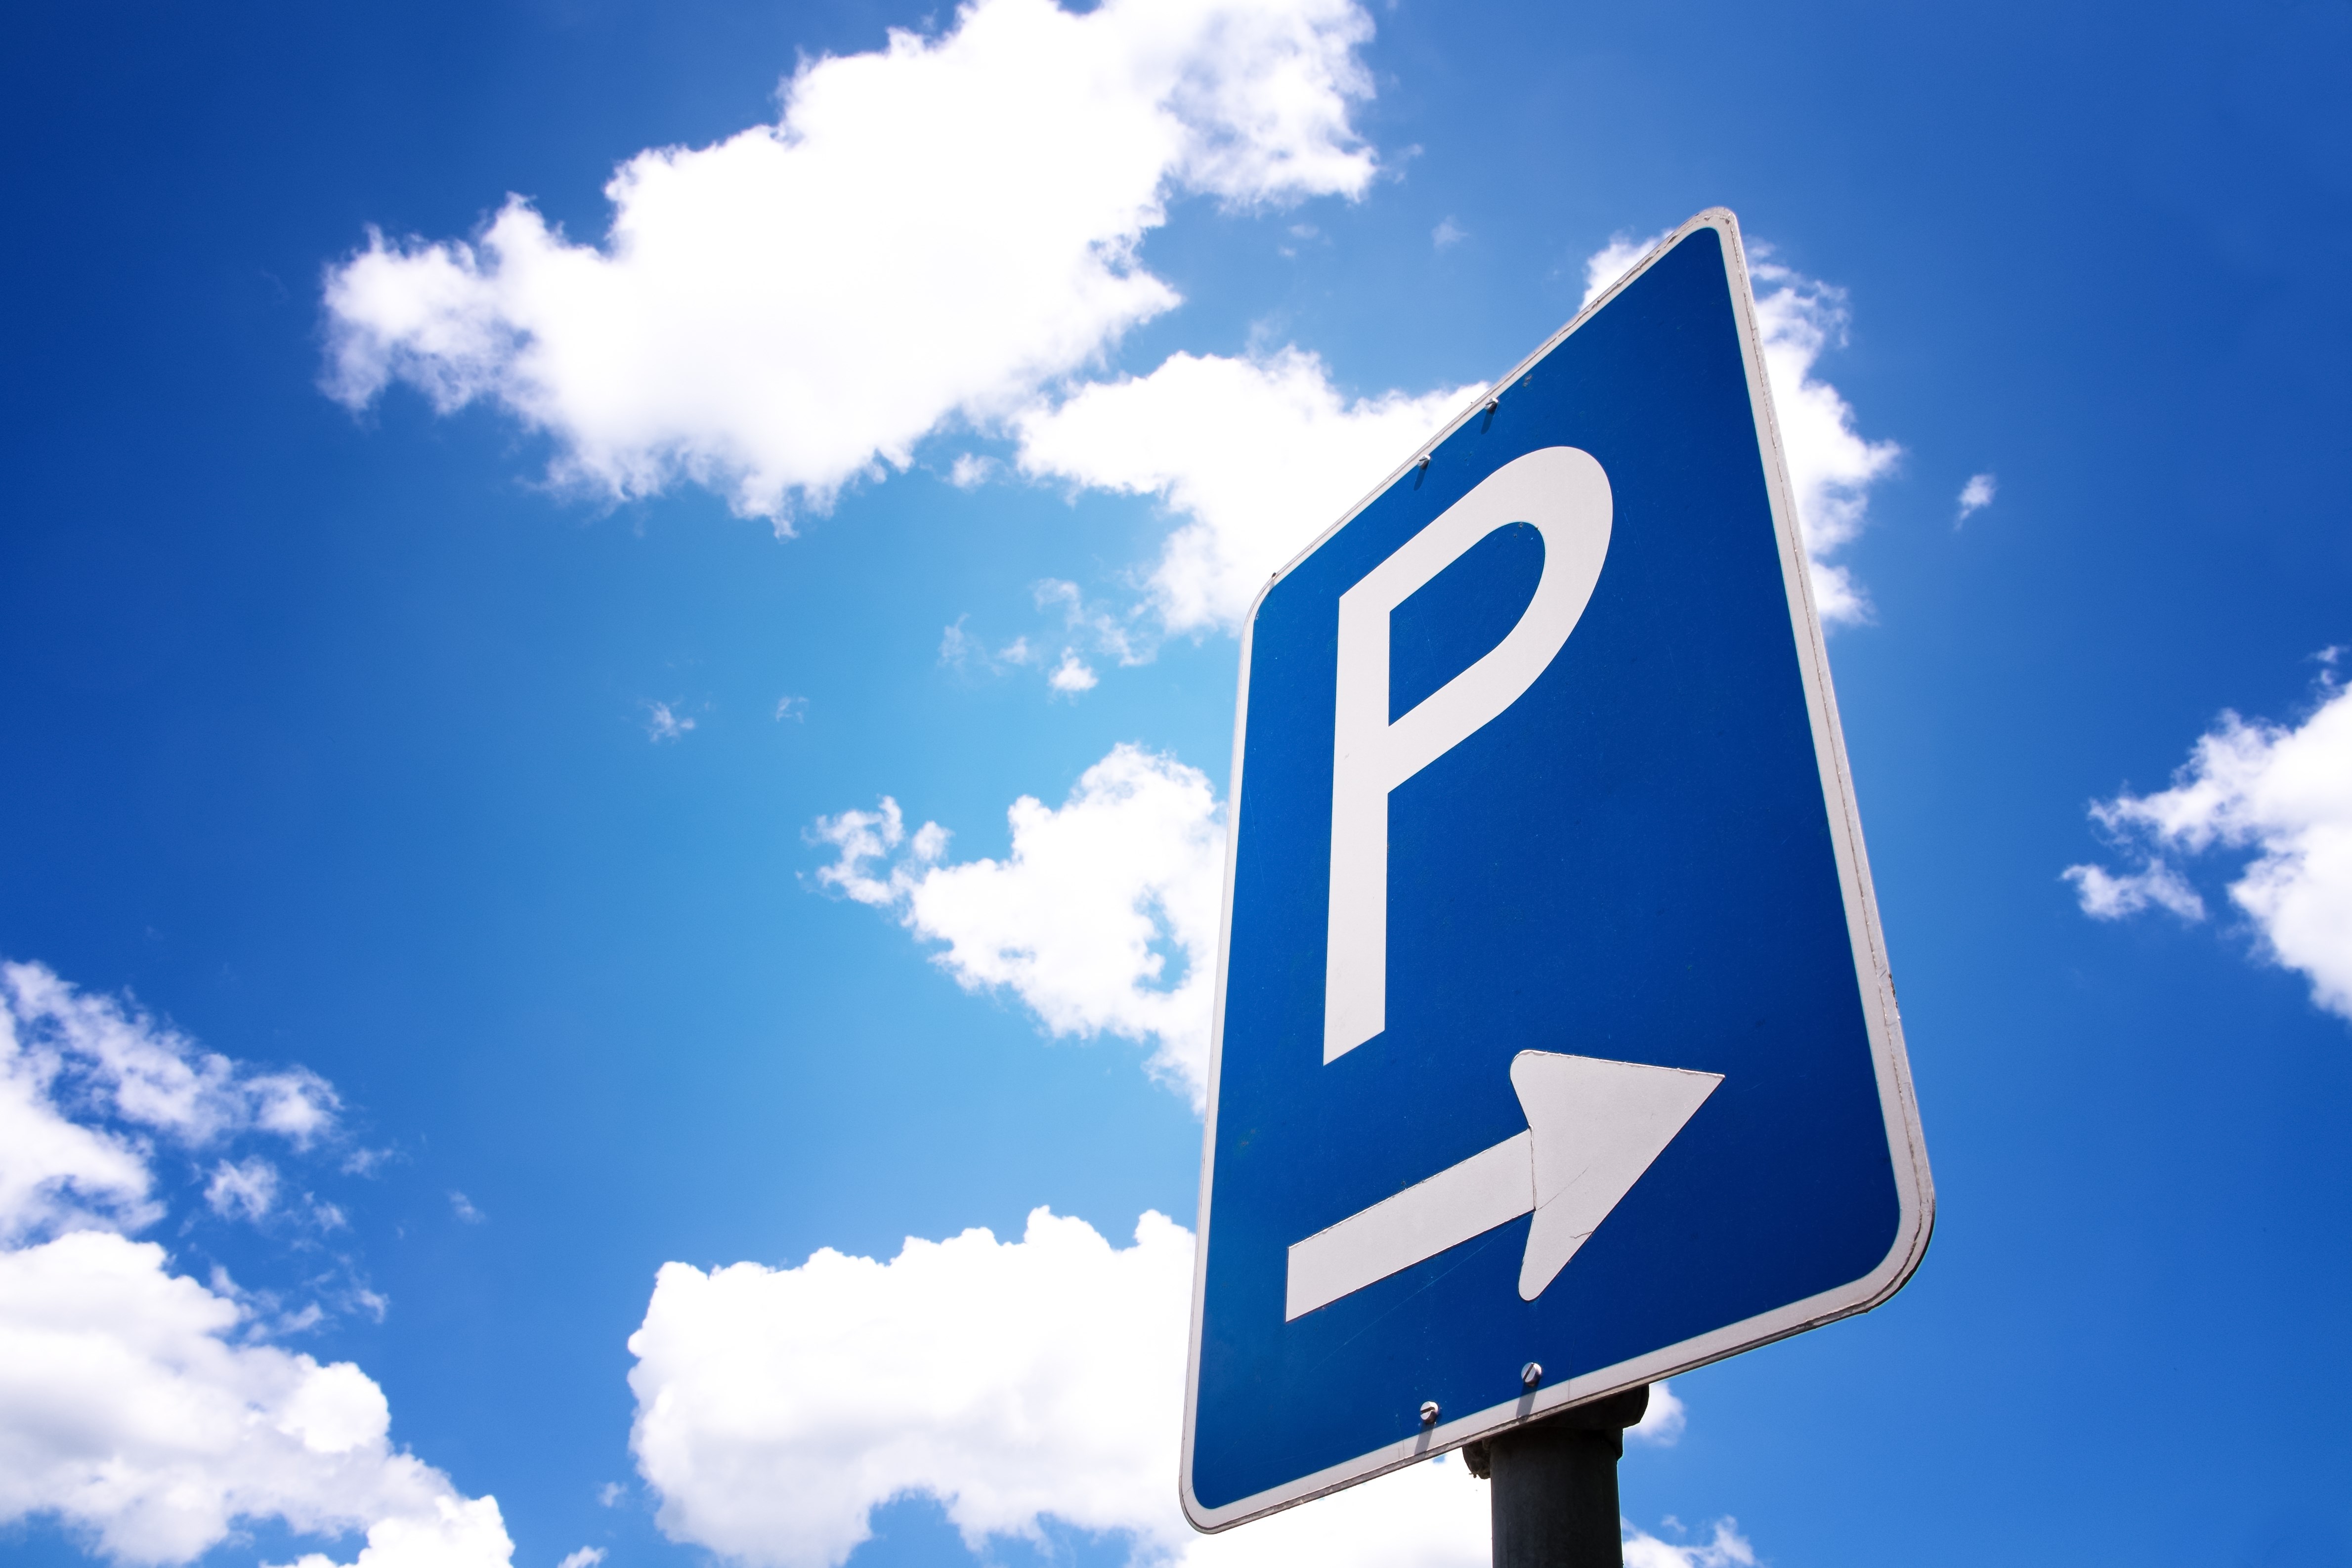 Parking sign with arrow. Blue sky and clouds in background.